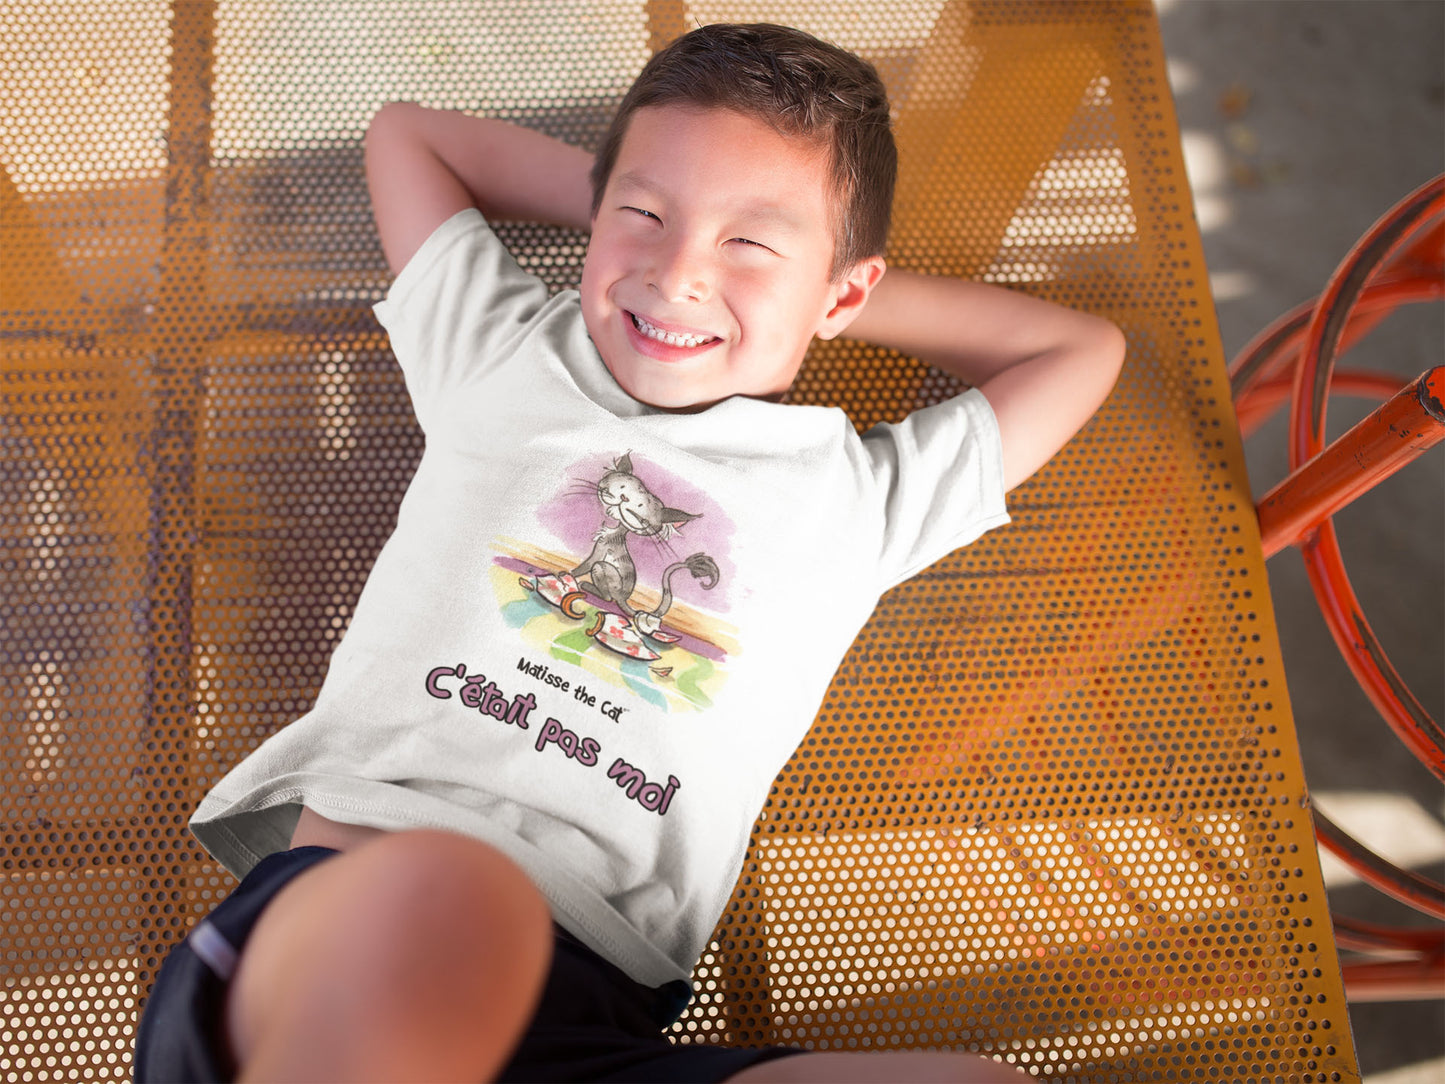 A white official, Matisse the Cat children’s t-shirt with the slogan “c'était pas moi” (It wasn’t me) featuring Matisse sitting on a vibrant carpet, his innocent gaze fixed upon a broken vase. Worn by a happy young boy in a playground.